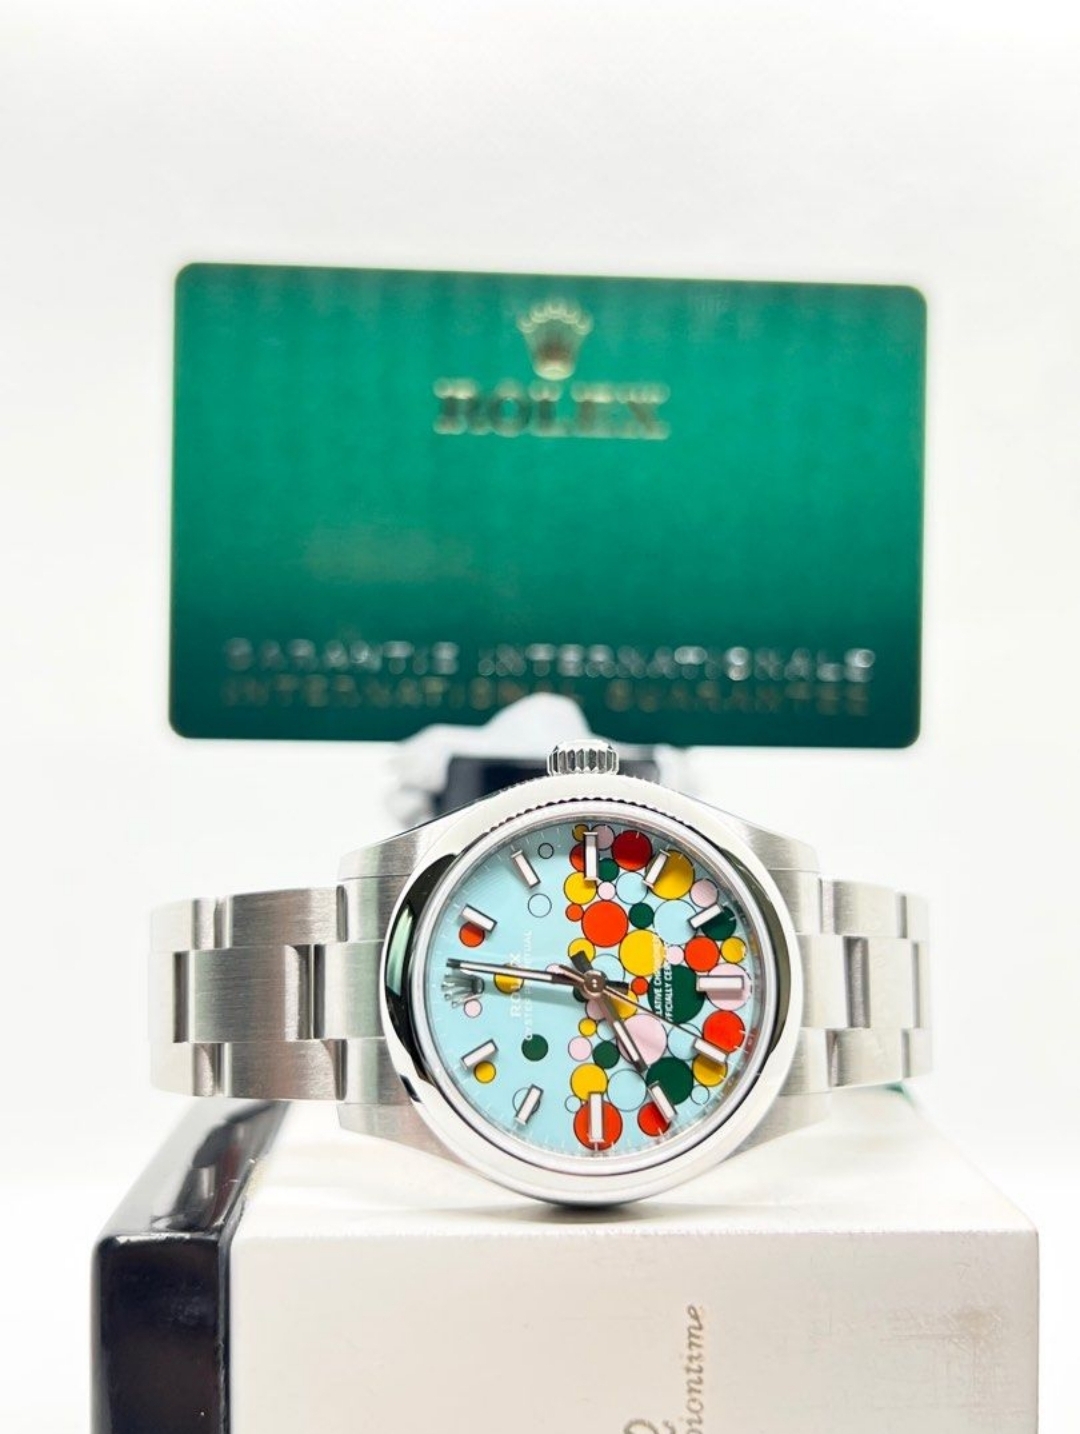 Oyster Perpetual 277200 “Celebration”